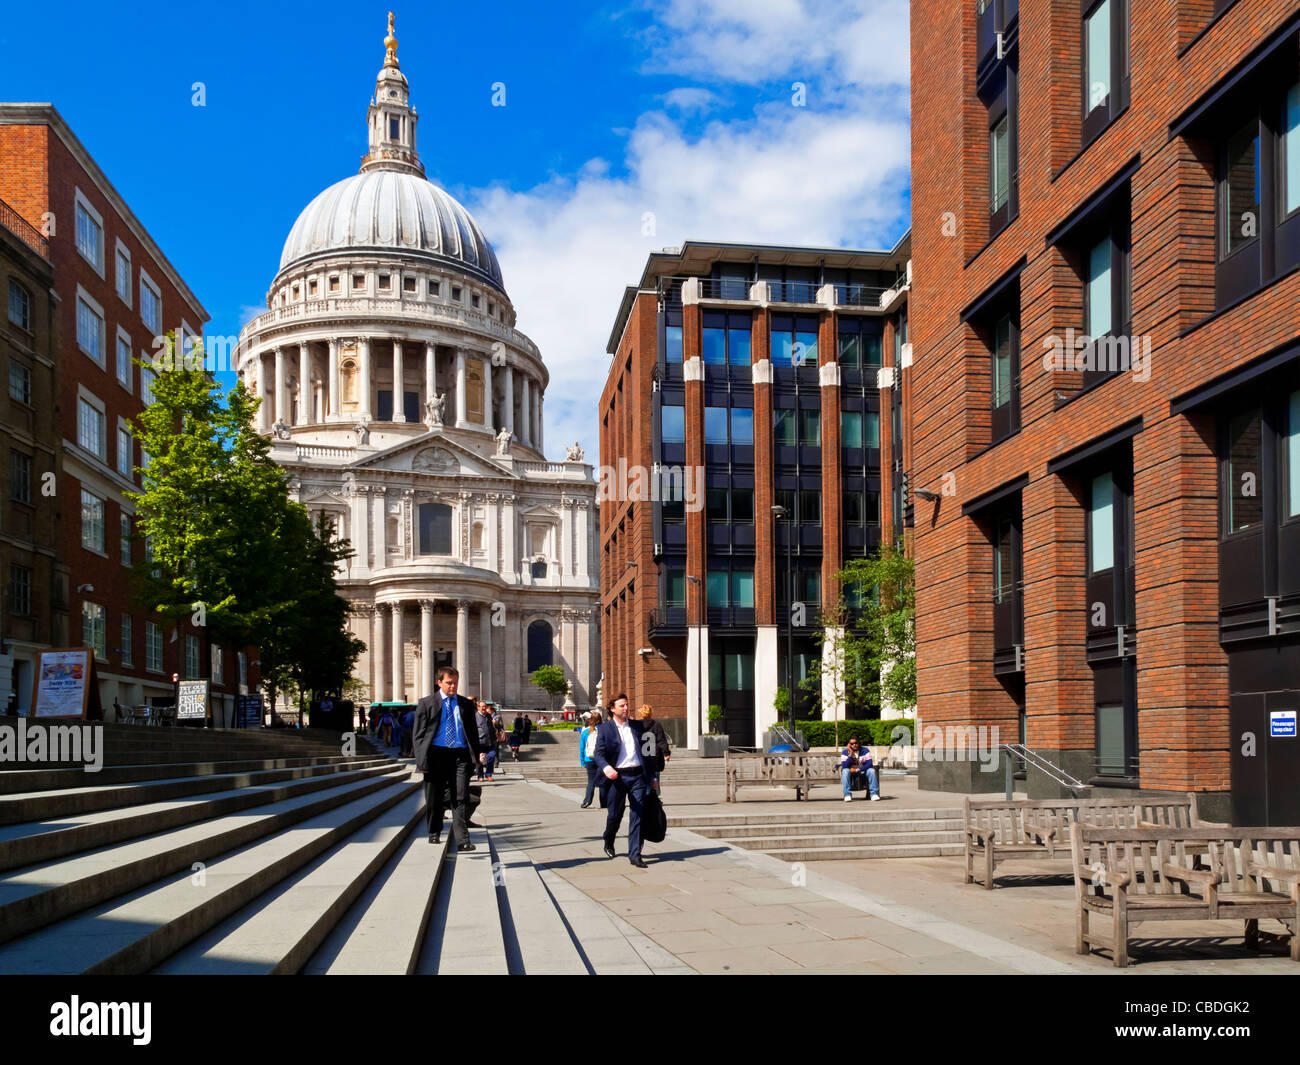 South Front of St Paul's Cathedral in the City of London England UK built by Sir Christopher Wren in the seventeenth century Stock Photo